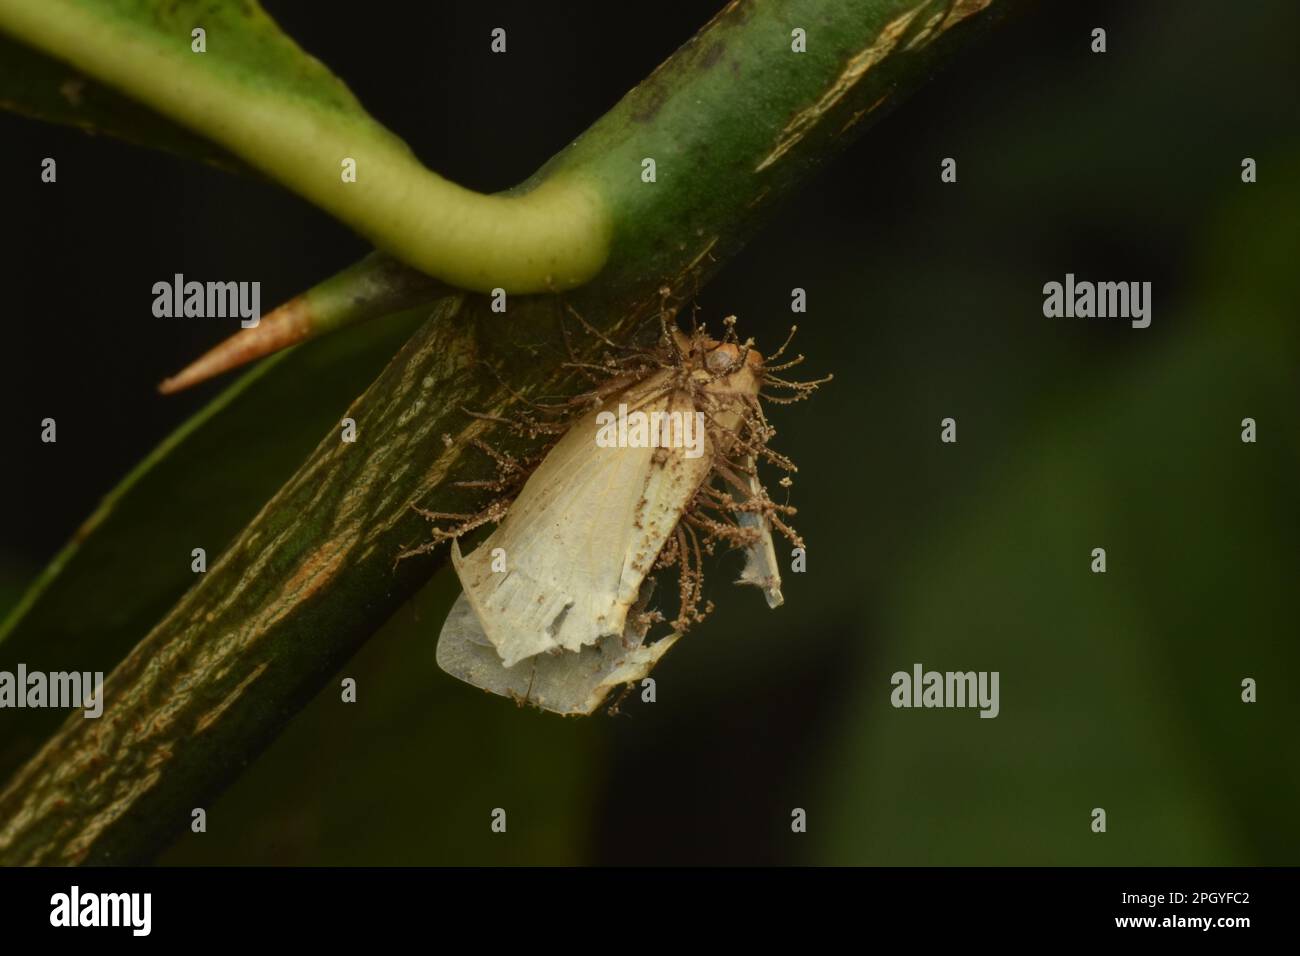 Planthopper attacked by fungi. Stock Photo